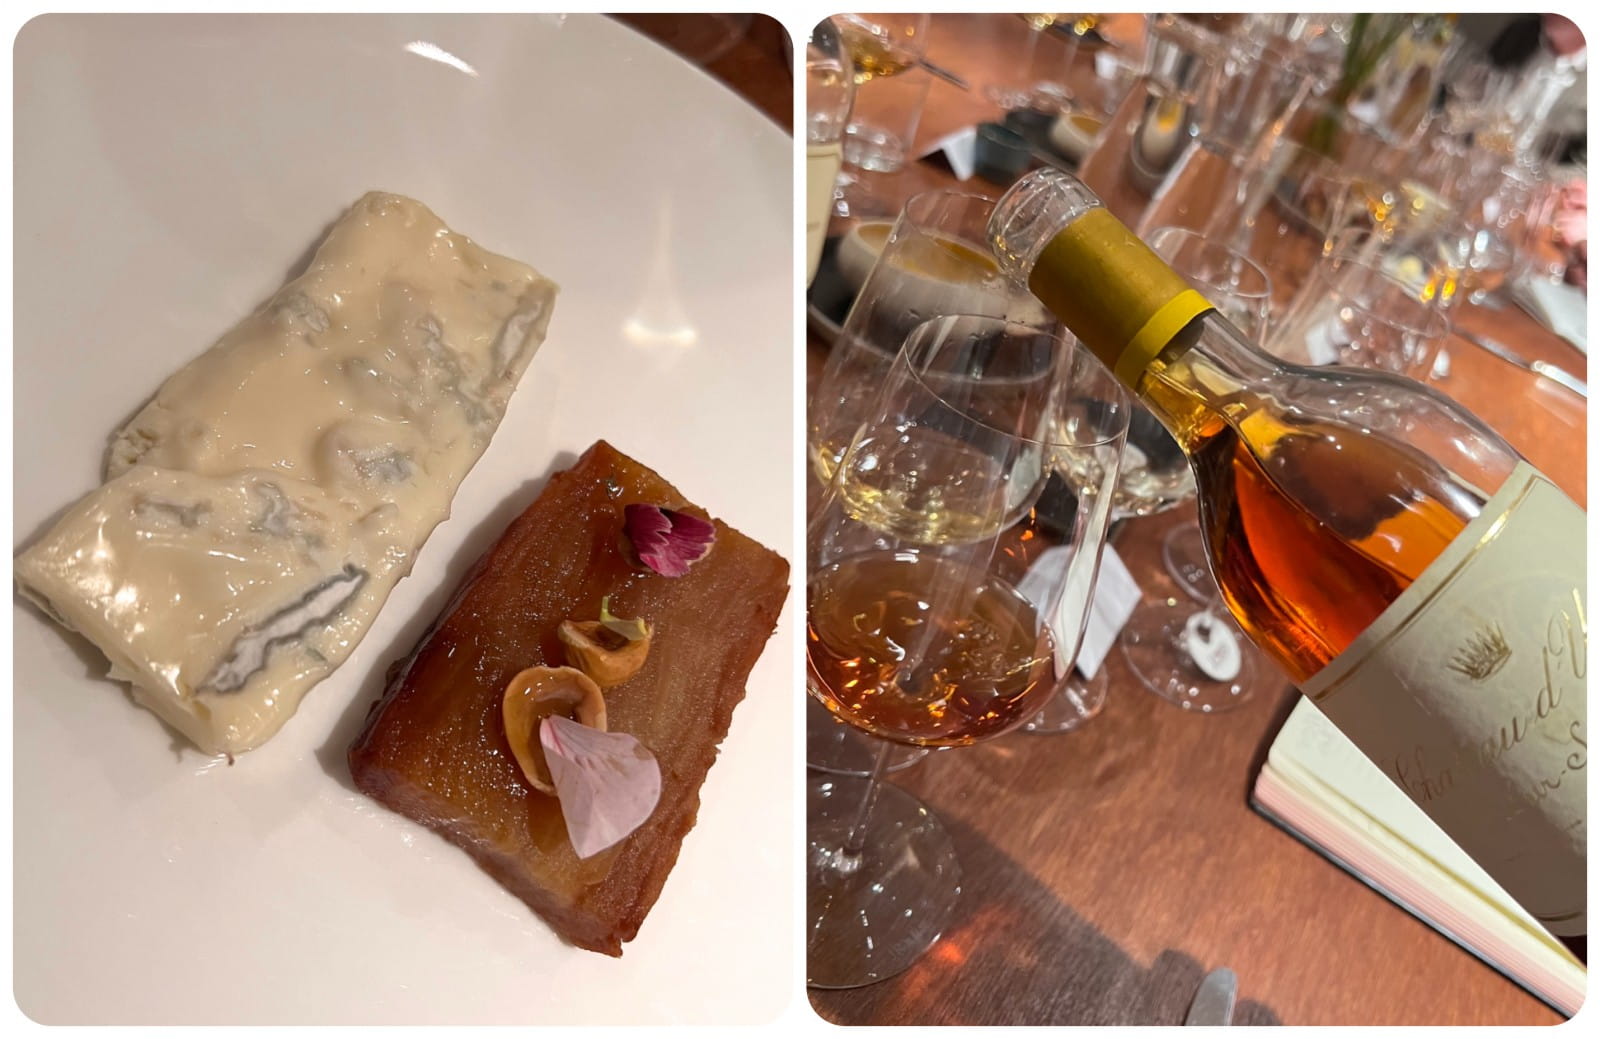 Chateau d’Yquem with Gorgonzola and a pressed apple terrine